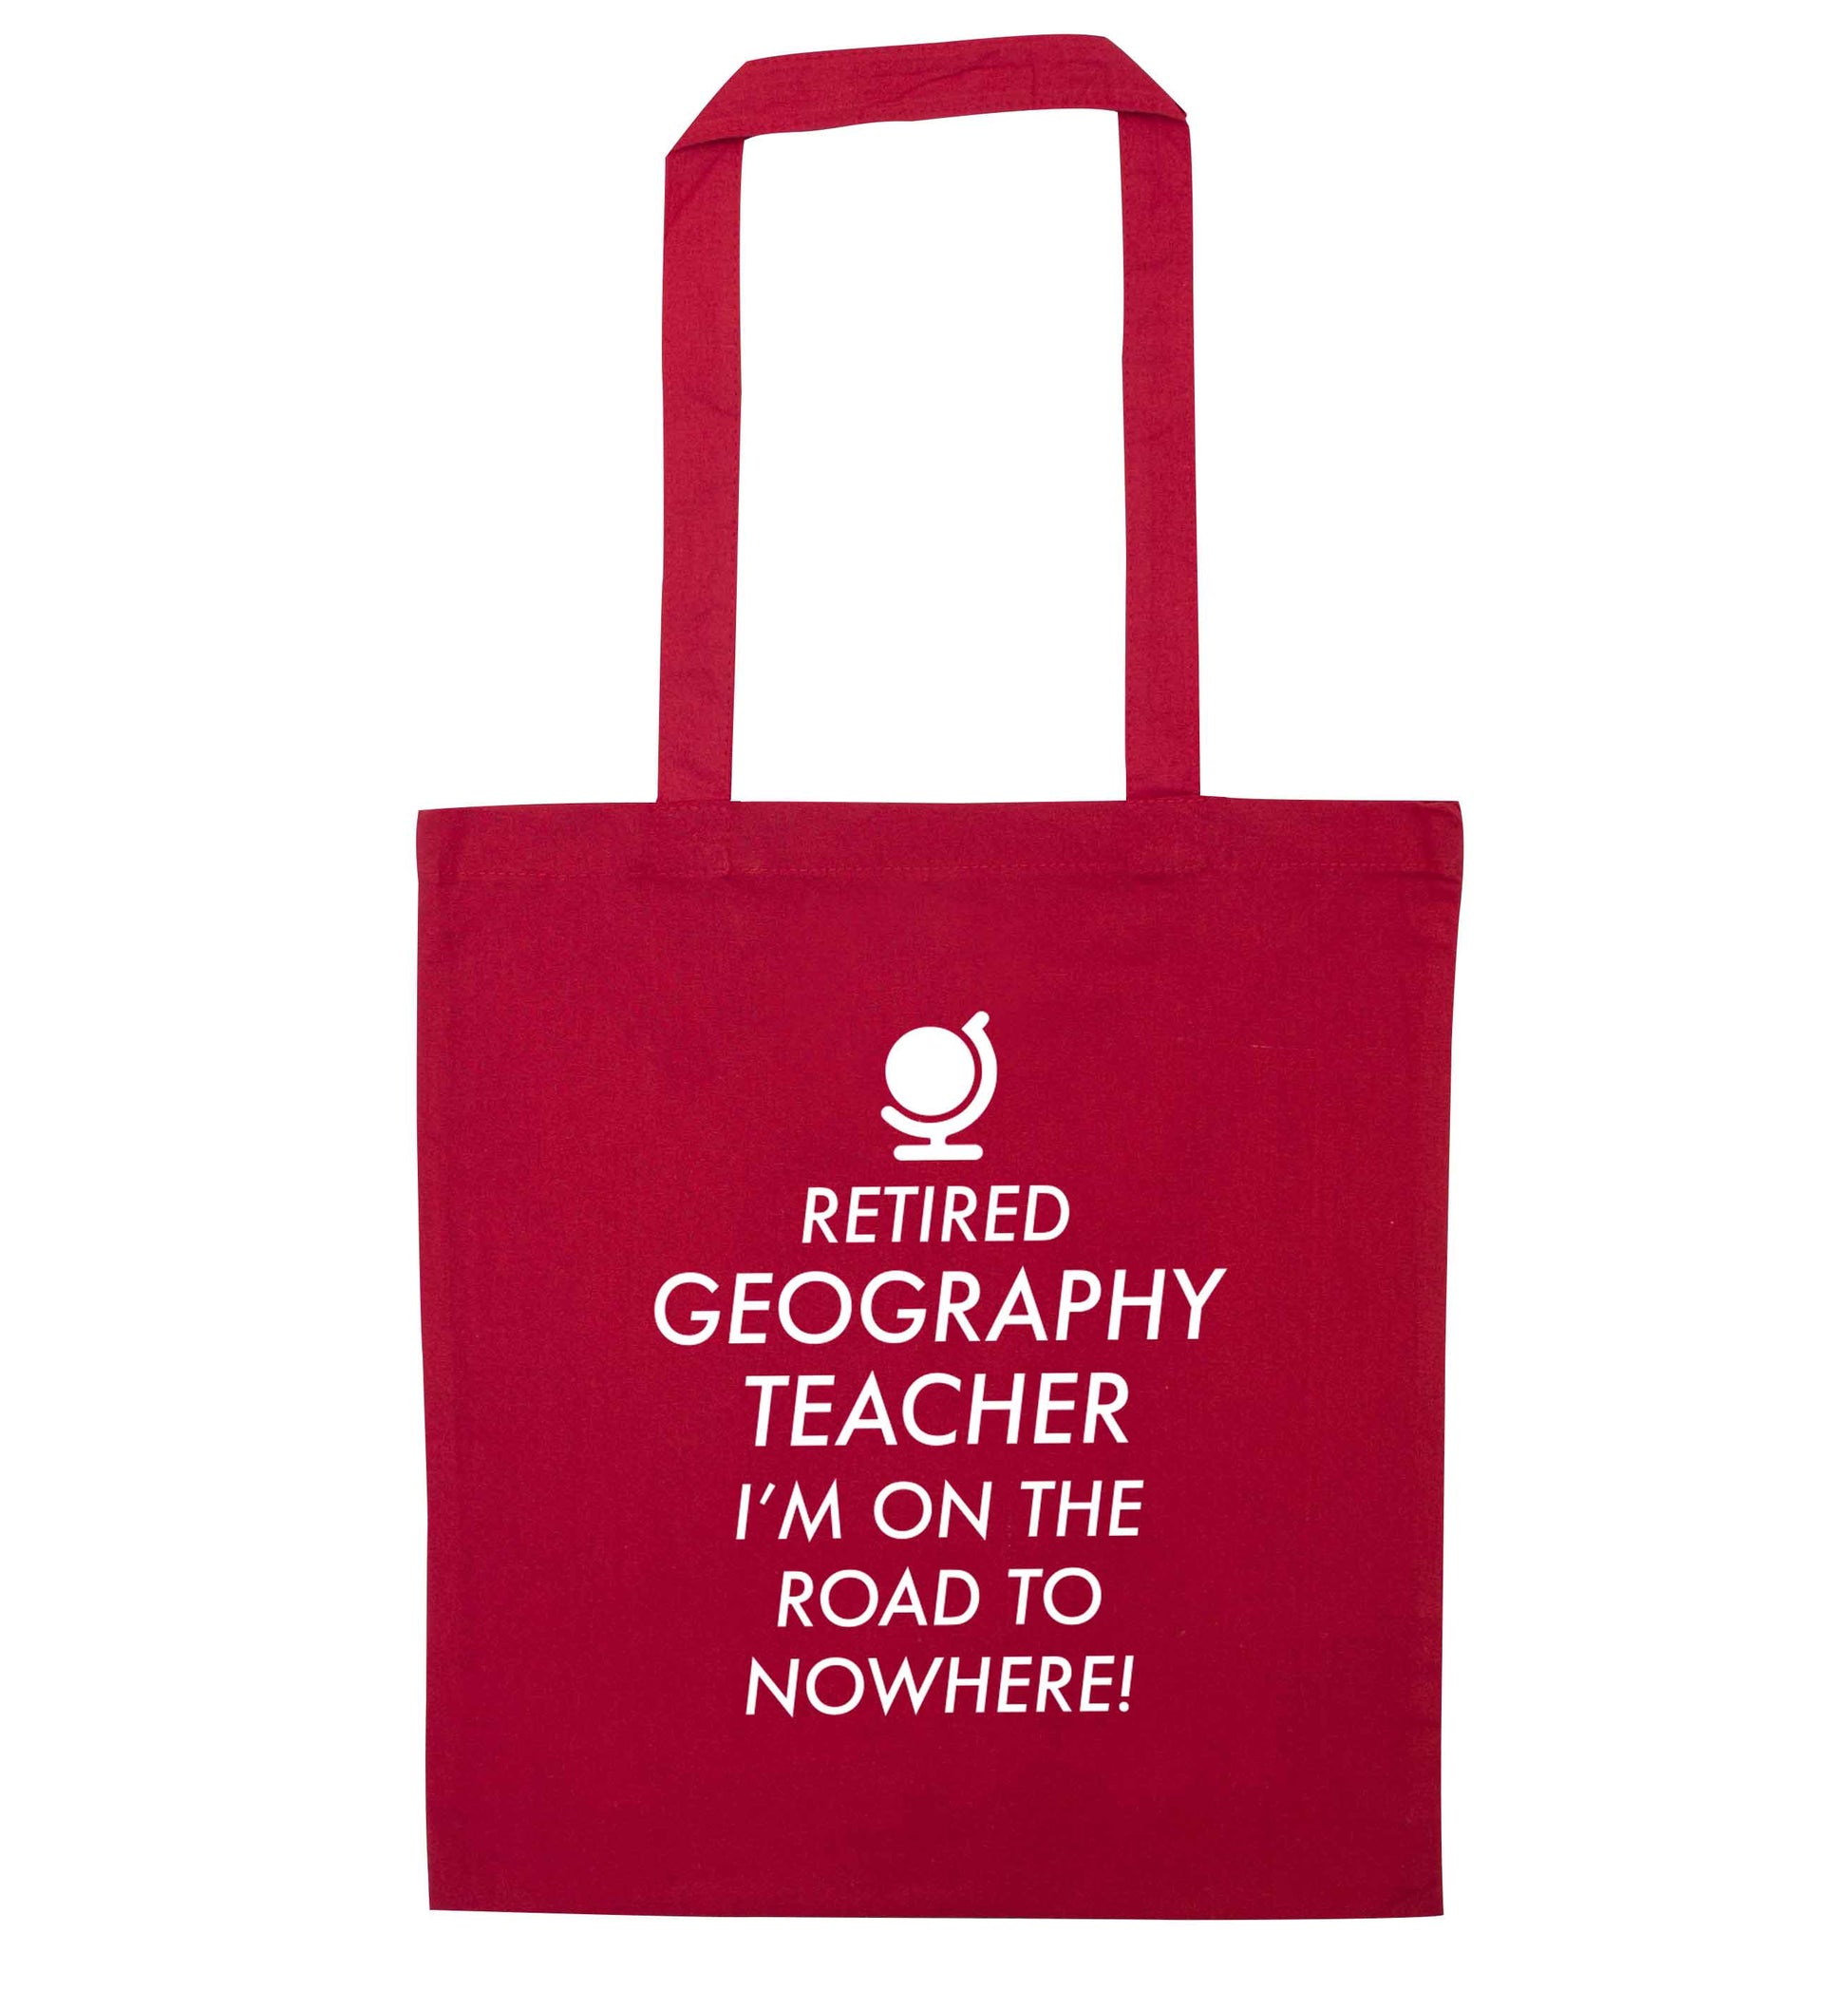 Retired geography teacher I'm on the road to nowhere red tote bag